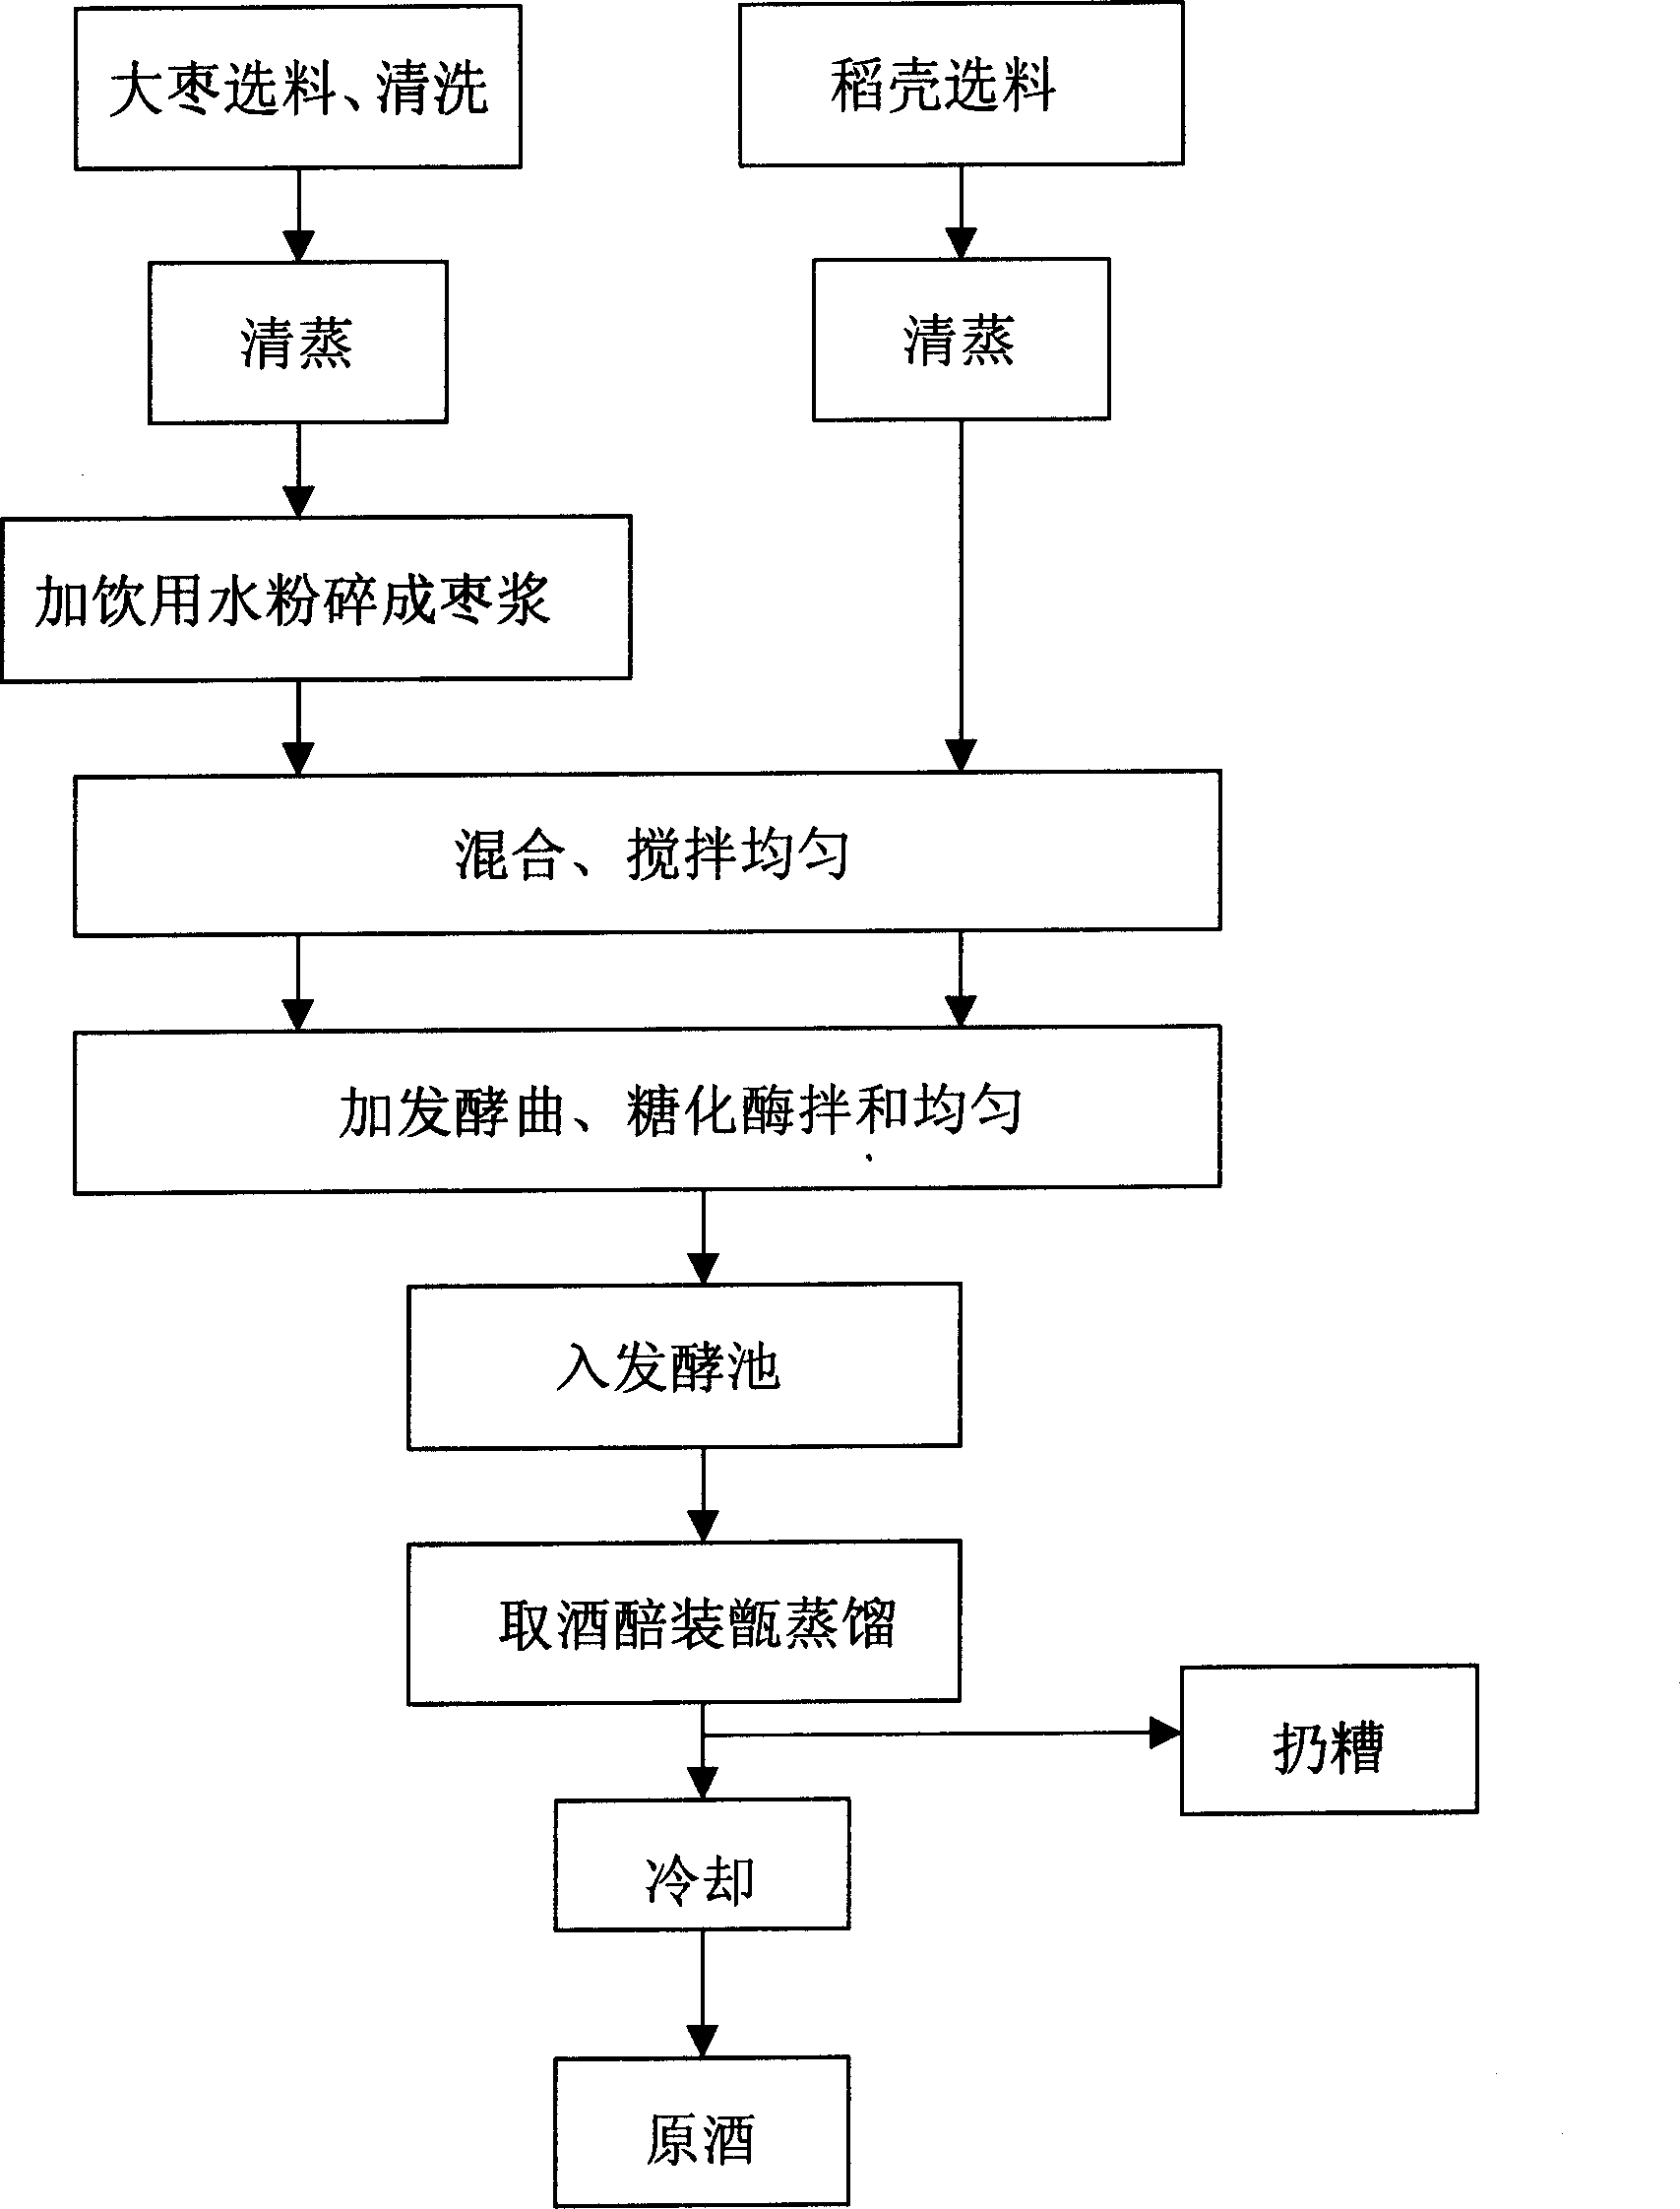 Technique for producing distillate spirits in fragrance of Chinese date by using red material